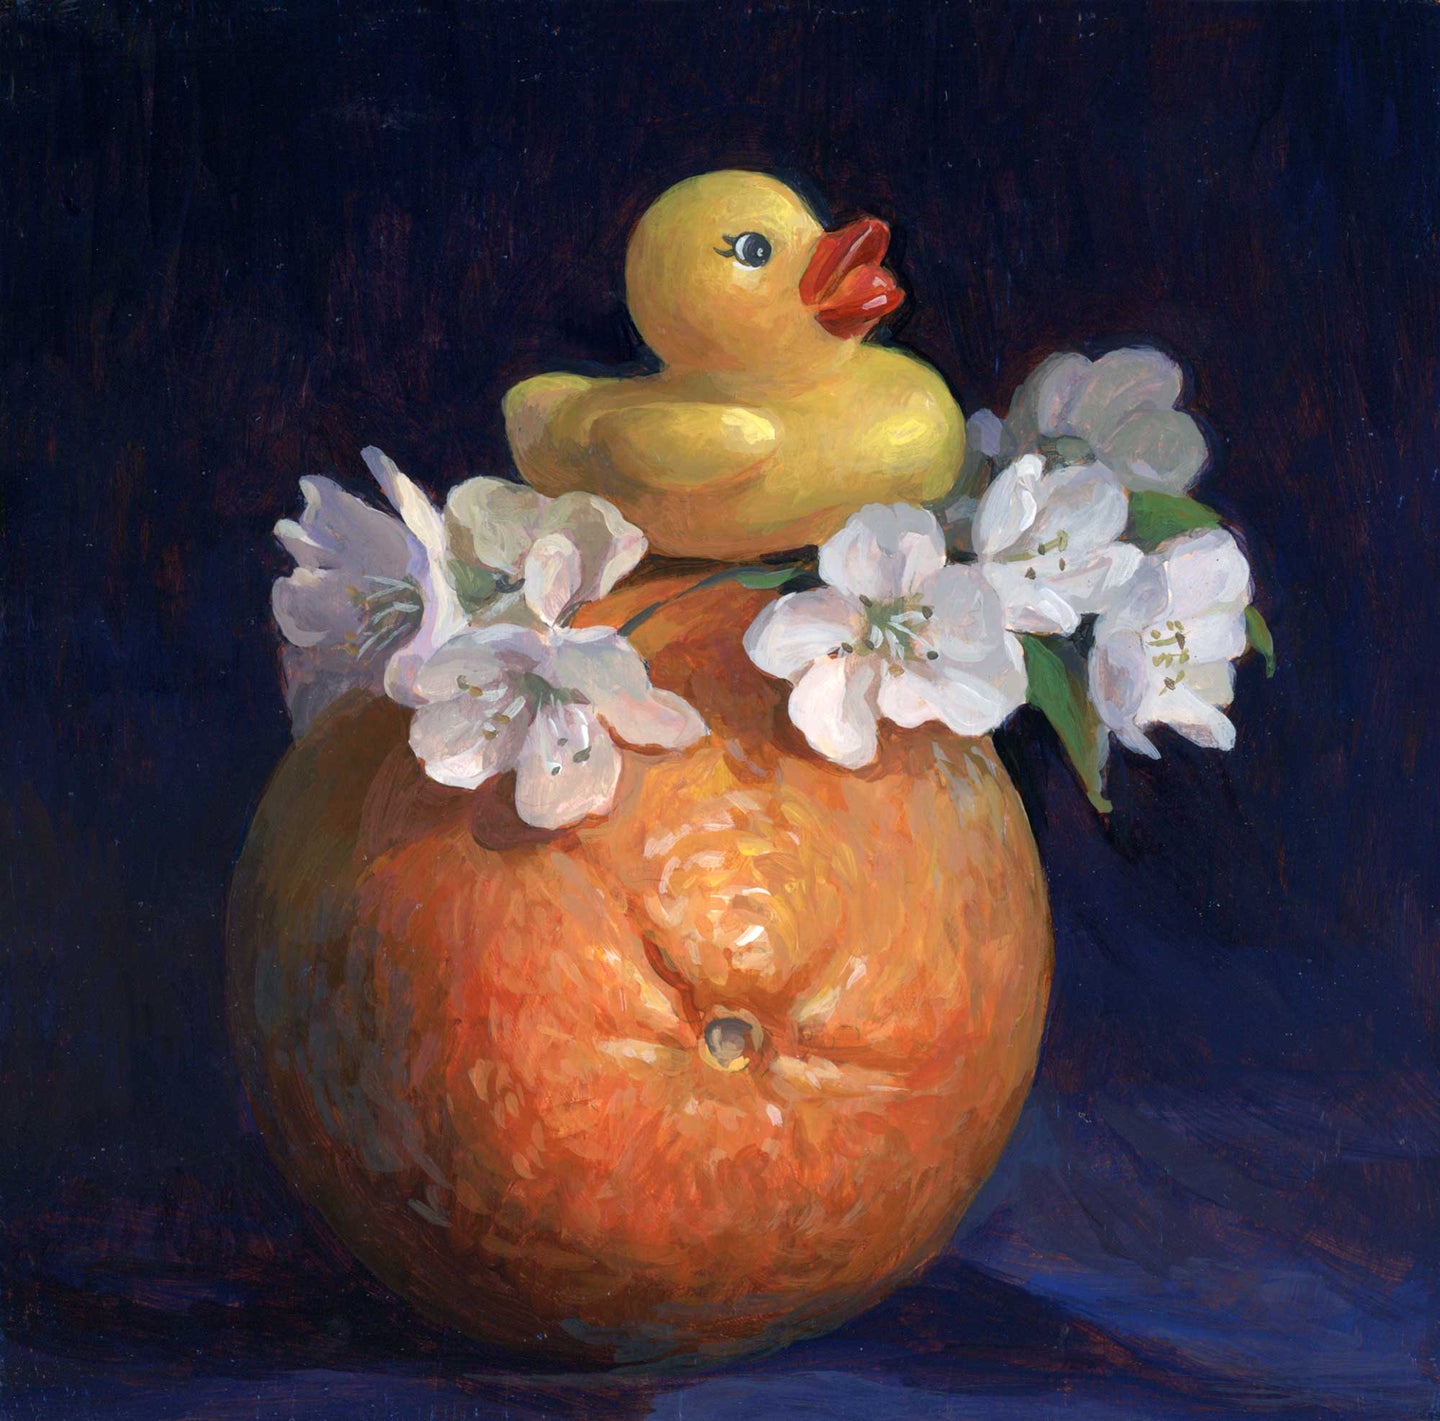 72. Rubber Ducky, Cherry Blossoms and Orange